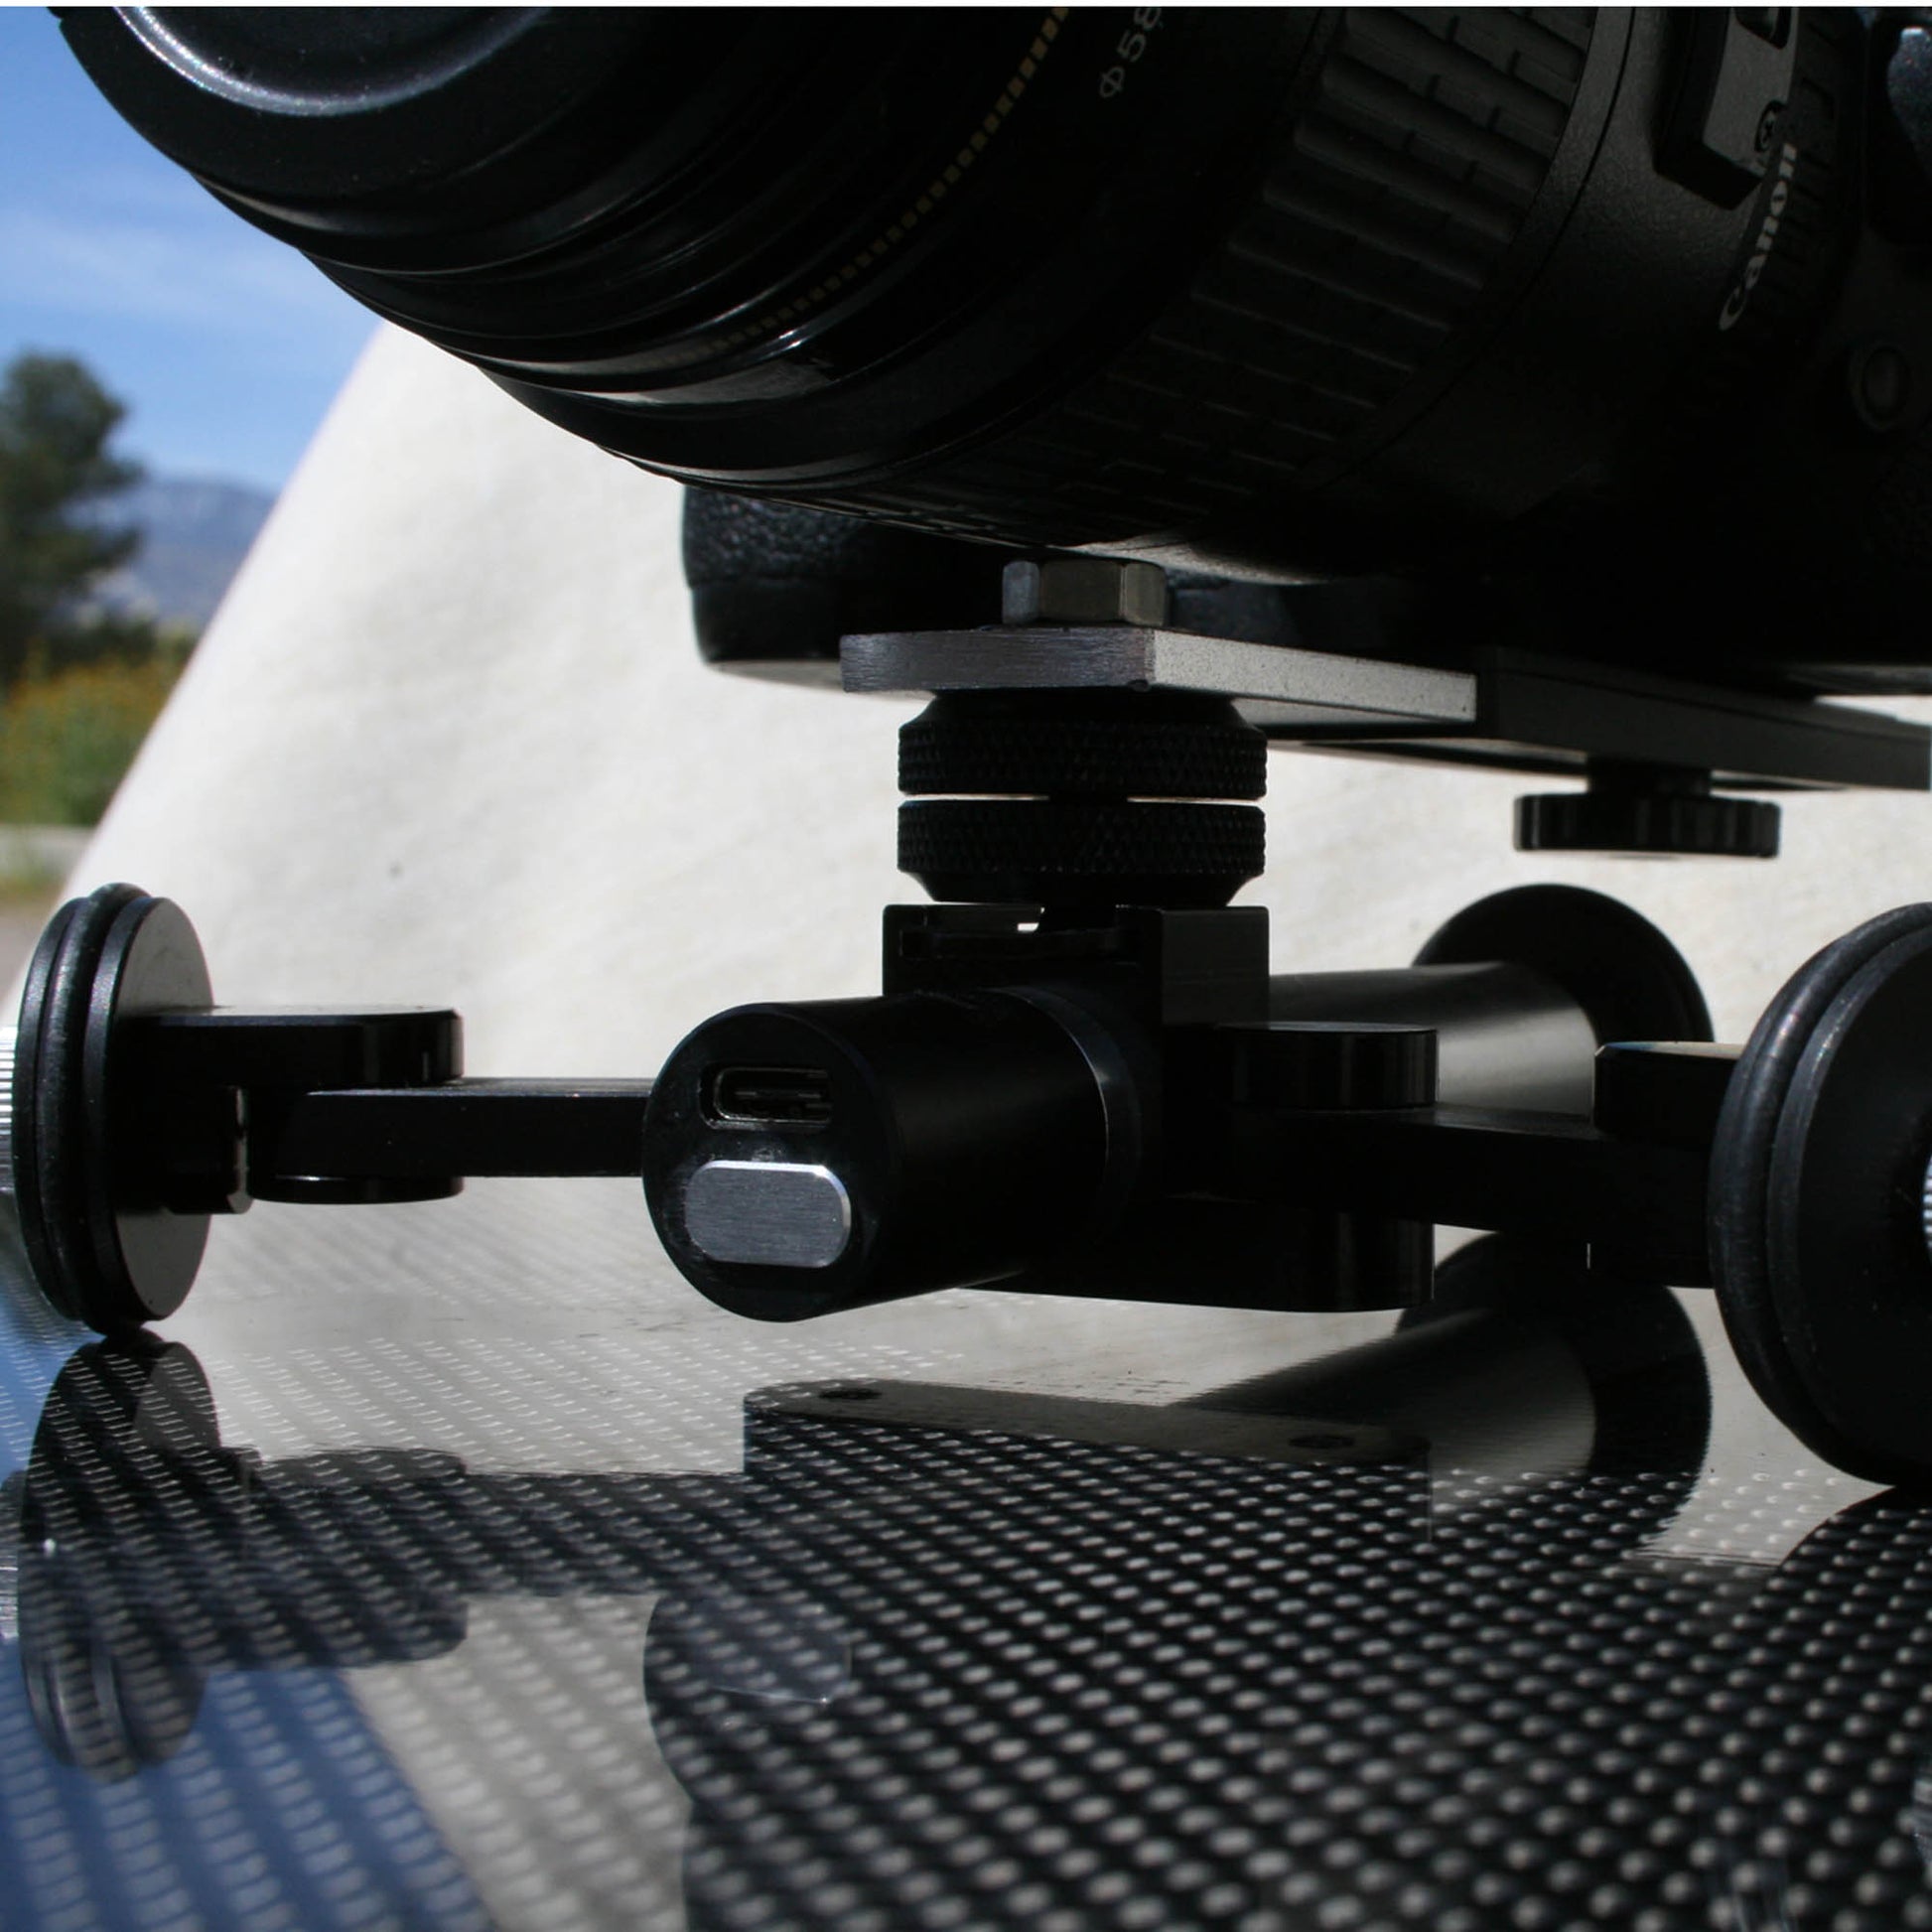 TalentTracker features the Rollocam H-2, the world's most intelligent tripod